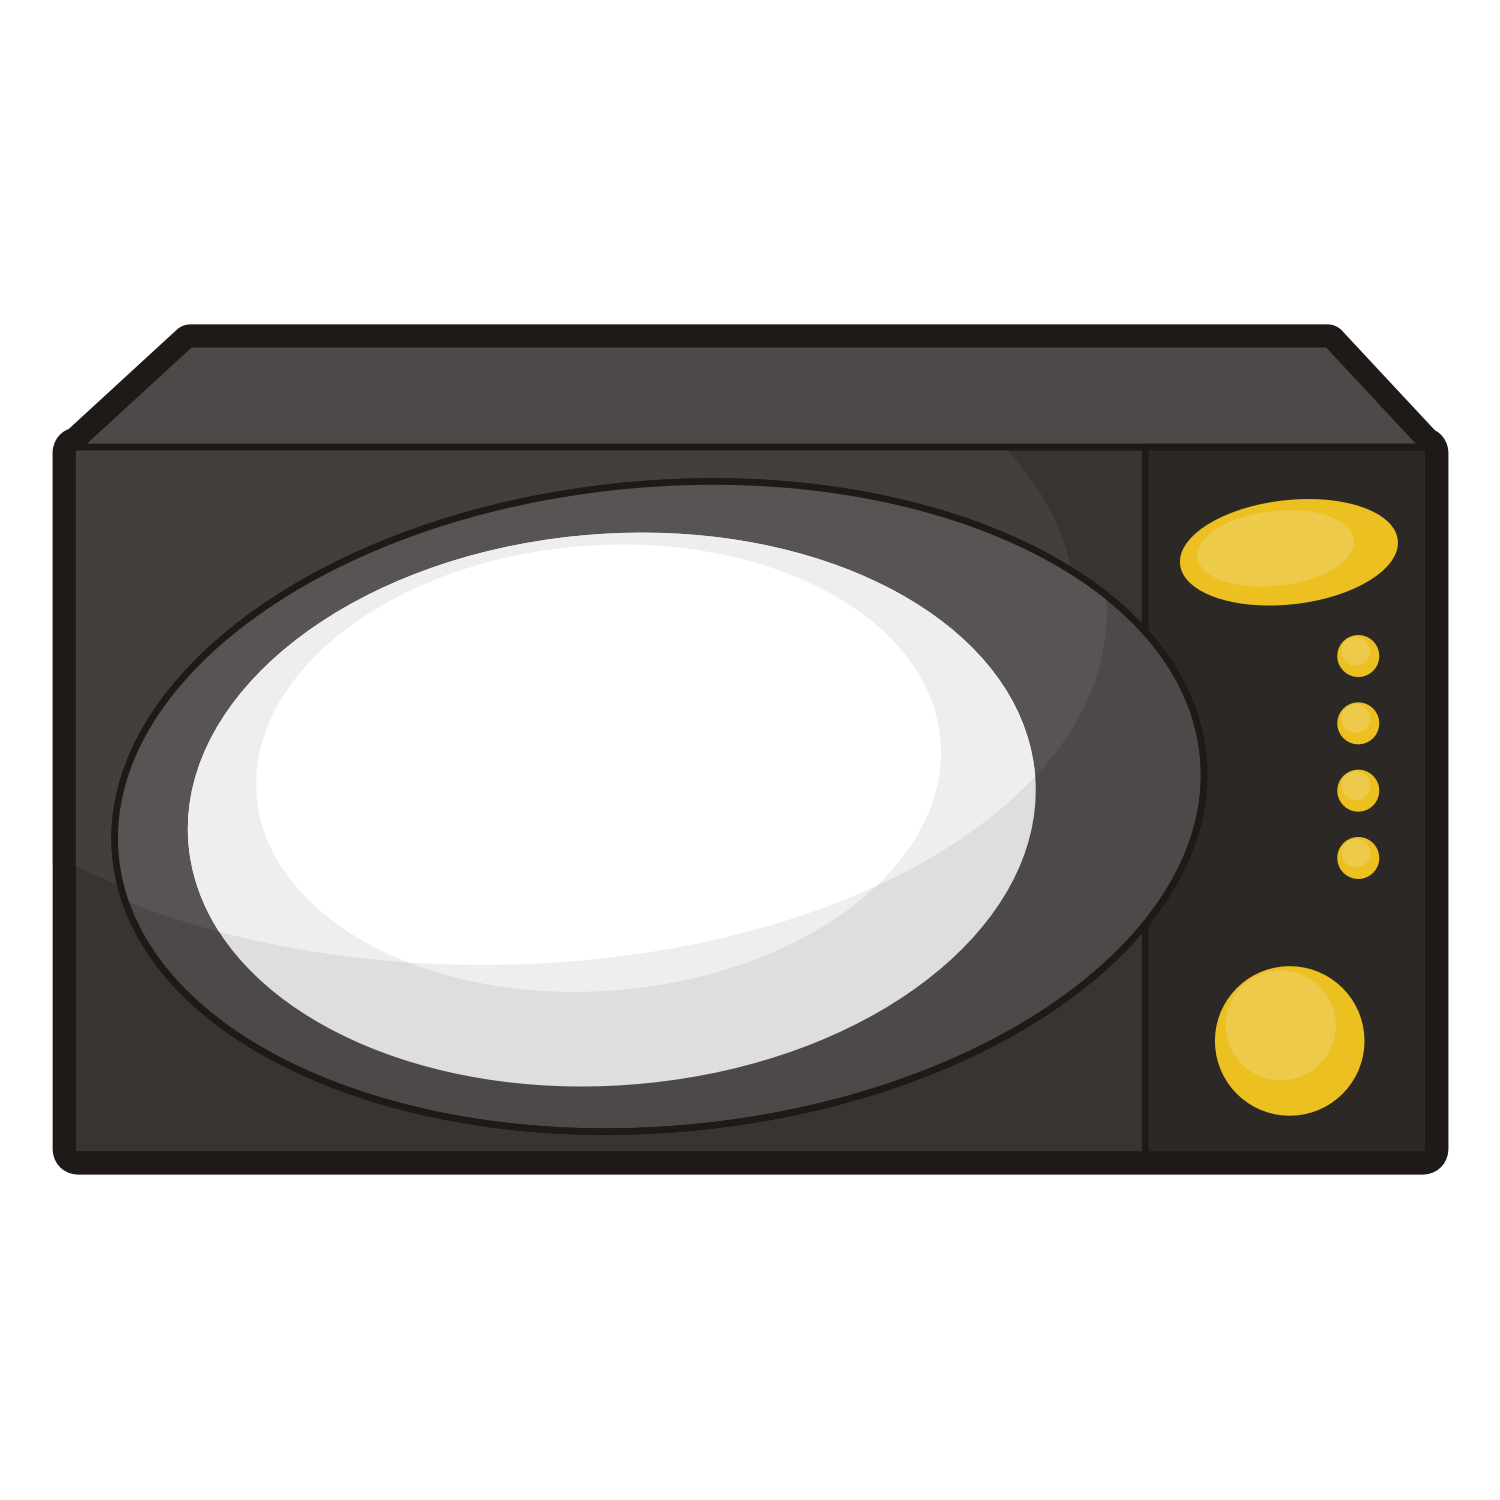 Vector for free use: Microwave oven